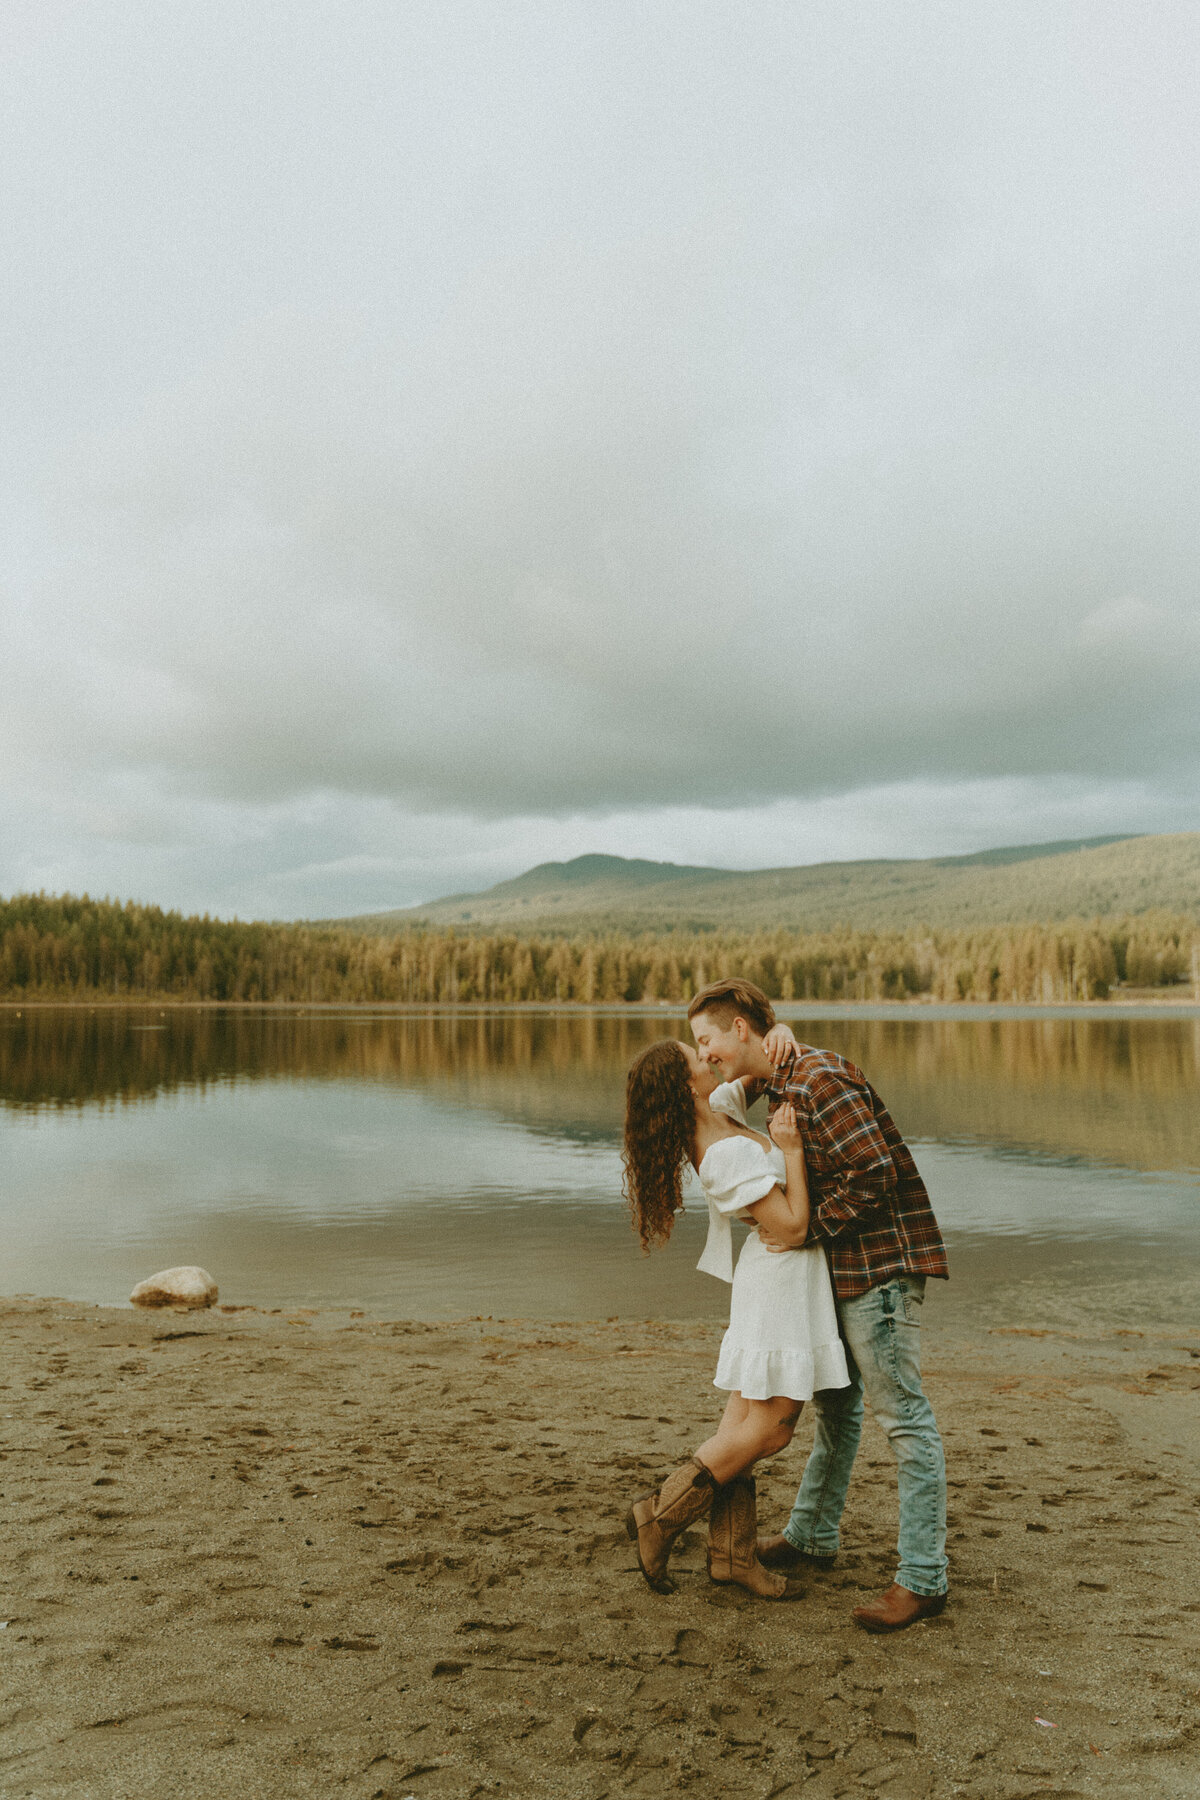 photo of a guy and girl kissing at the lake with mountains in the background